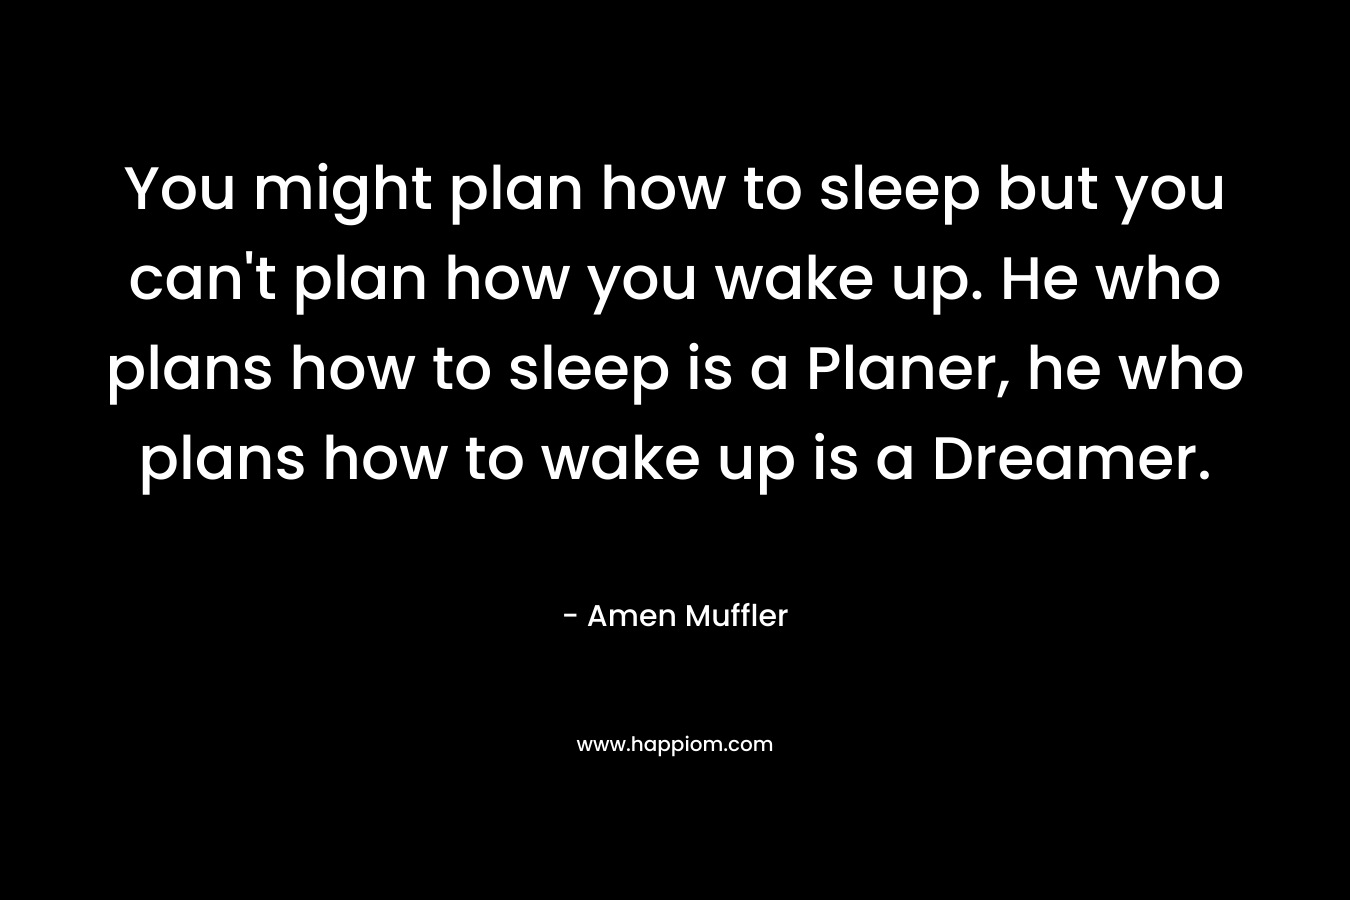 You might plan how to sleep but you can't plan how you wake up. He who plans how to sleep is a Planer, he who plans how to wake up is a Dreamer.